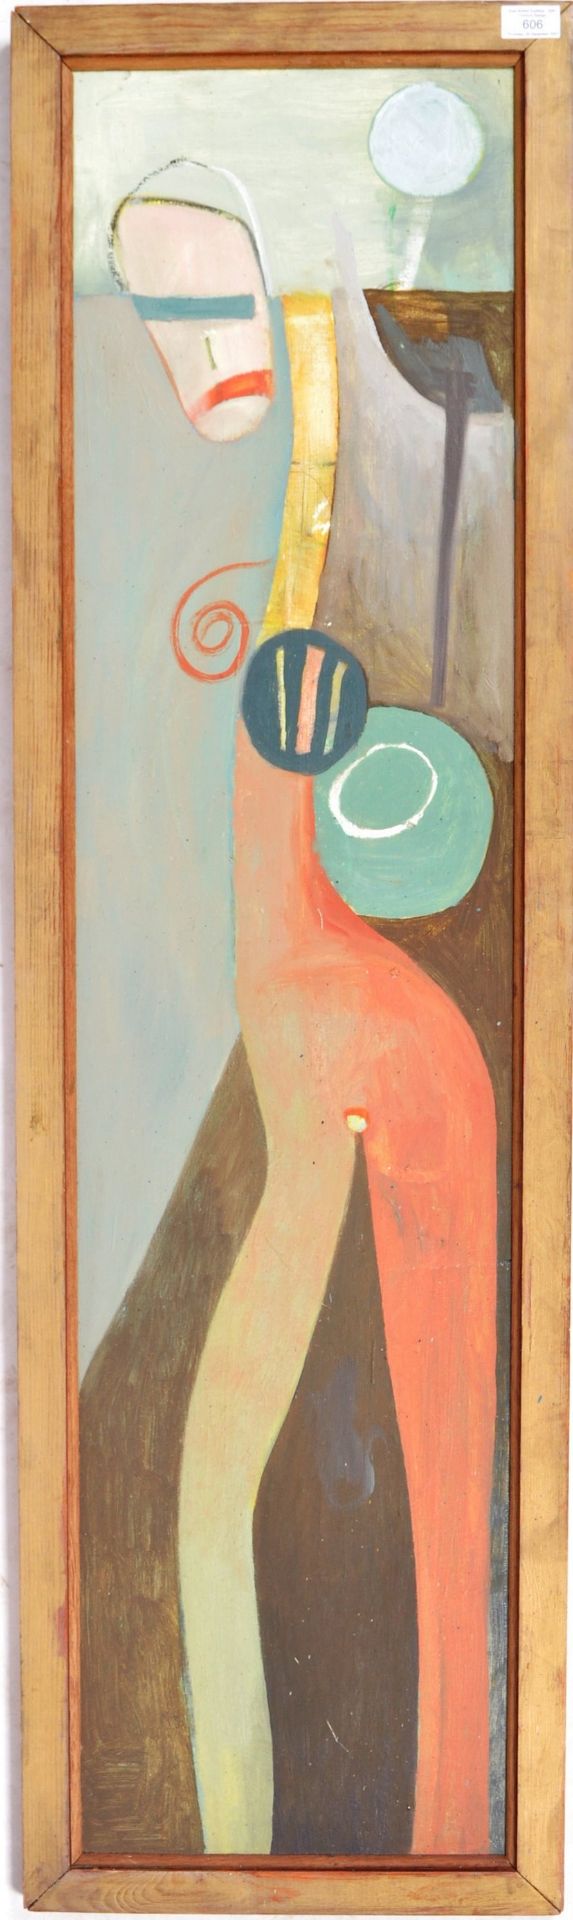 20TH CENTURY OIL ON BOARD ABSTRACT FIGURE PAINTING - Image 2 of 8